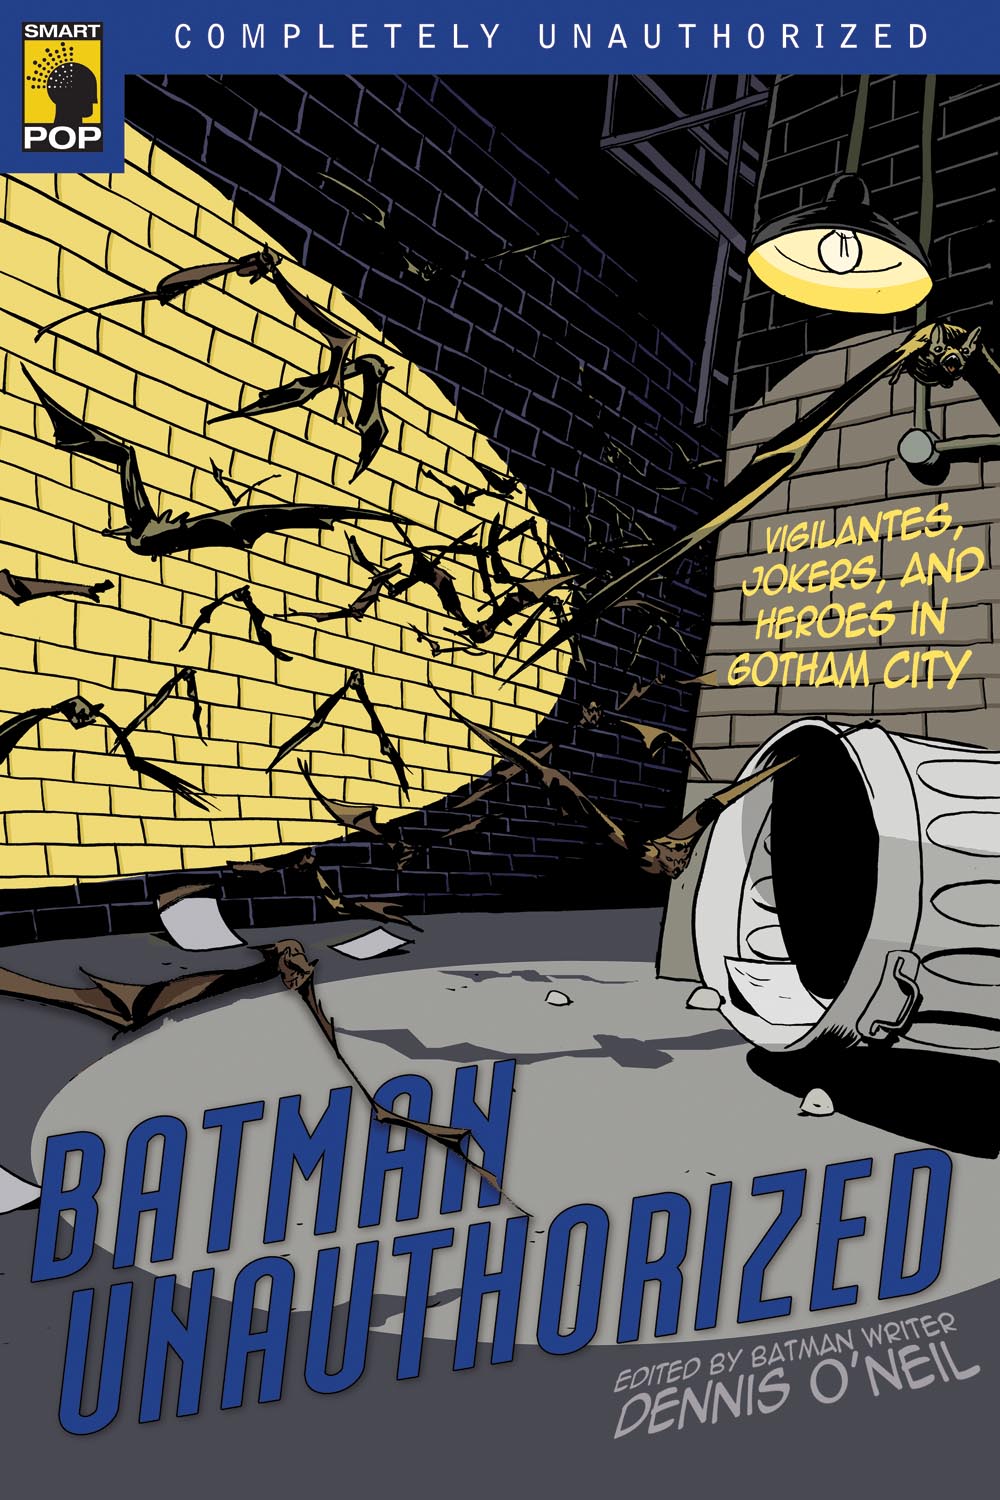 An image of the cover of Batman Unauthorized, Dennis O'Neil, Ed.